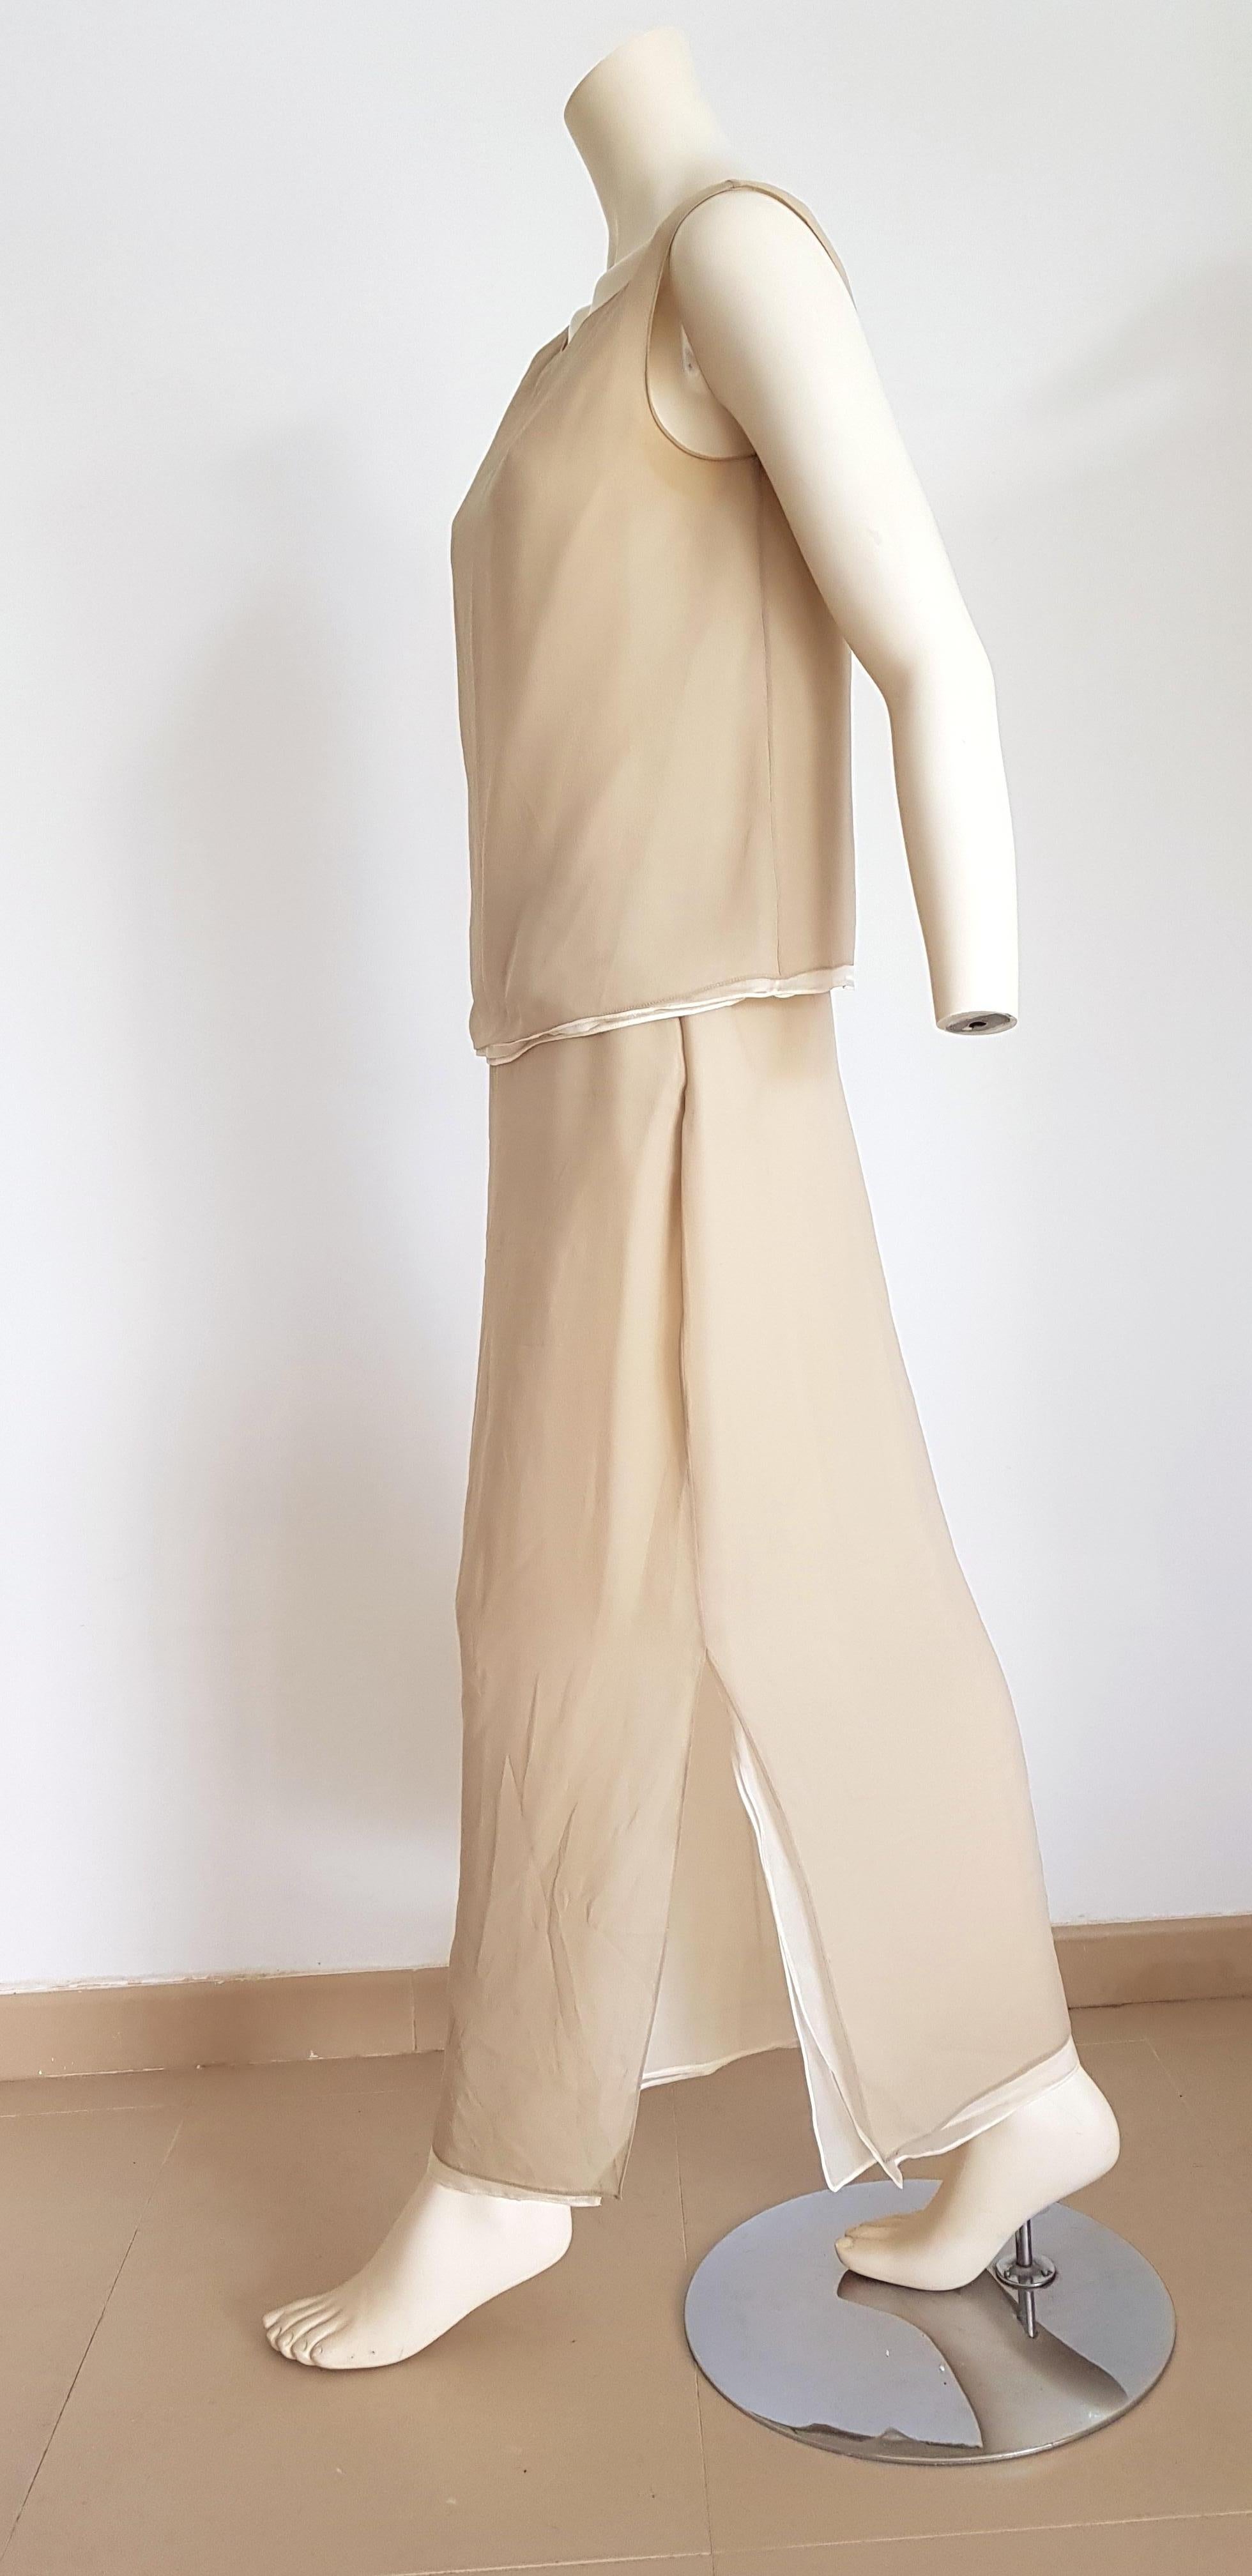 Donna Karan two beige tones, double layer, top and skirt silk dress - Unworn, New

SIZE: equivalent to about Small / Medium, please review approx measurements as follows in cm. 
TOP: lenght 52, chest underarm to underarm 50, bust circumference 85,